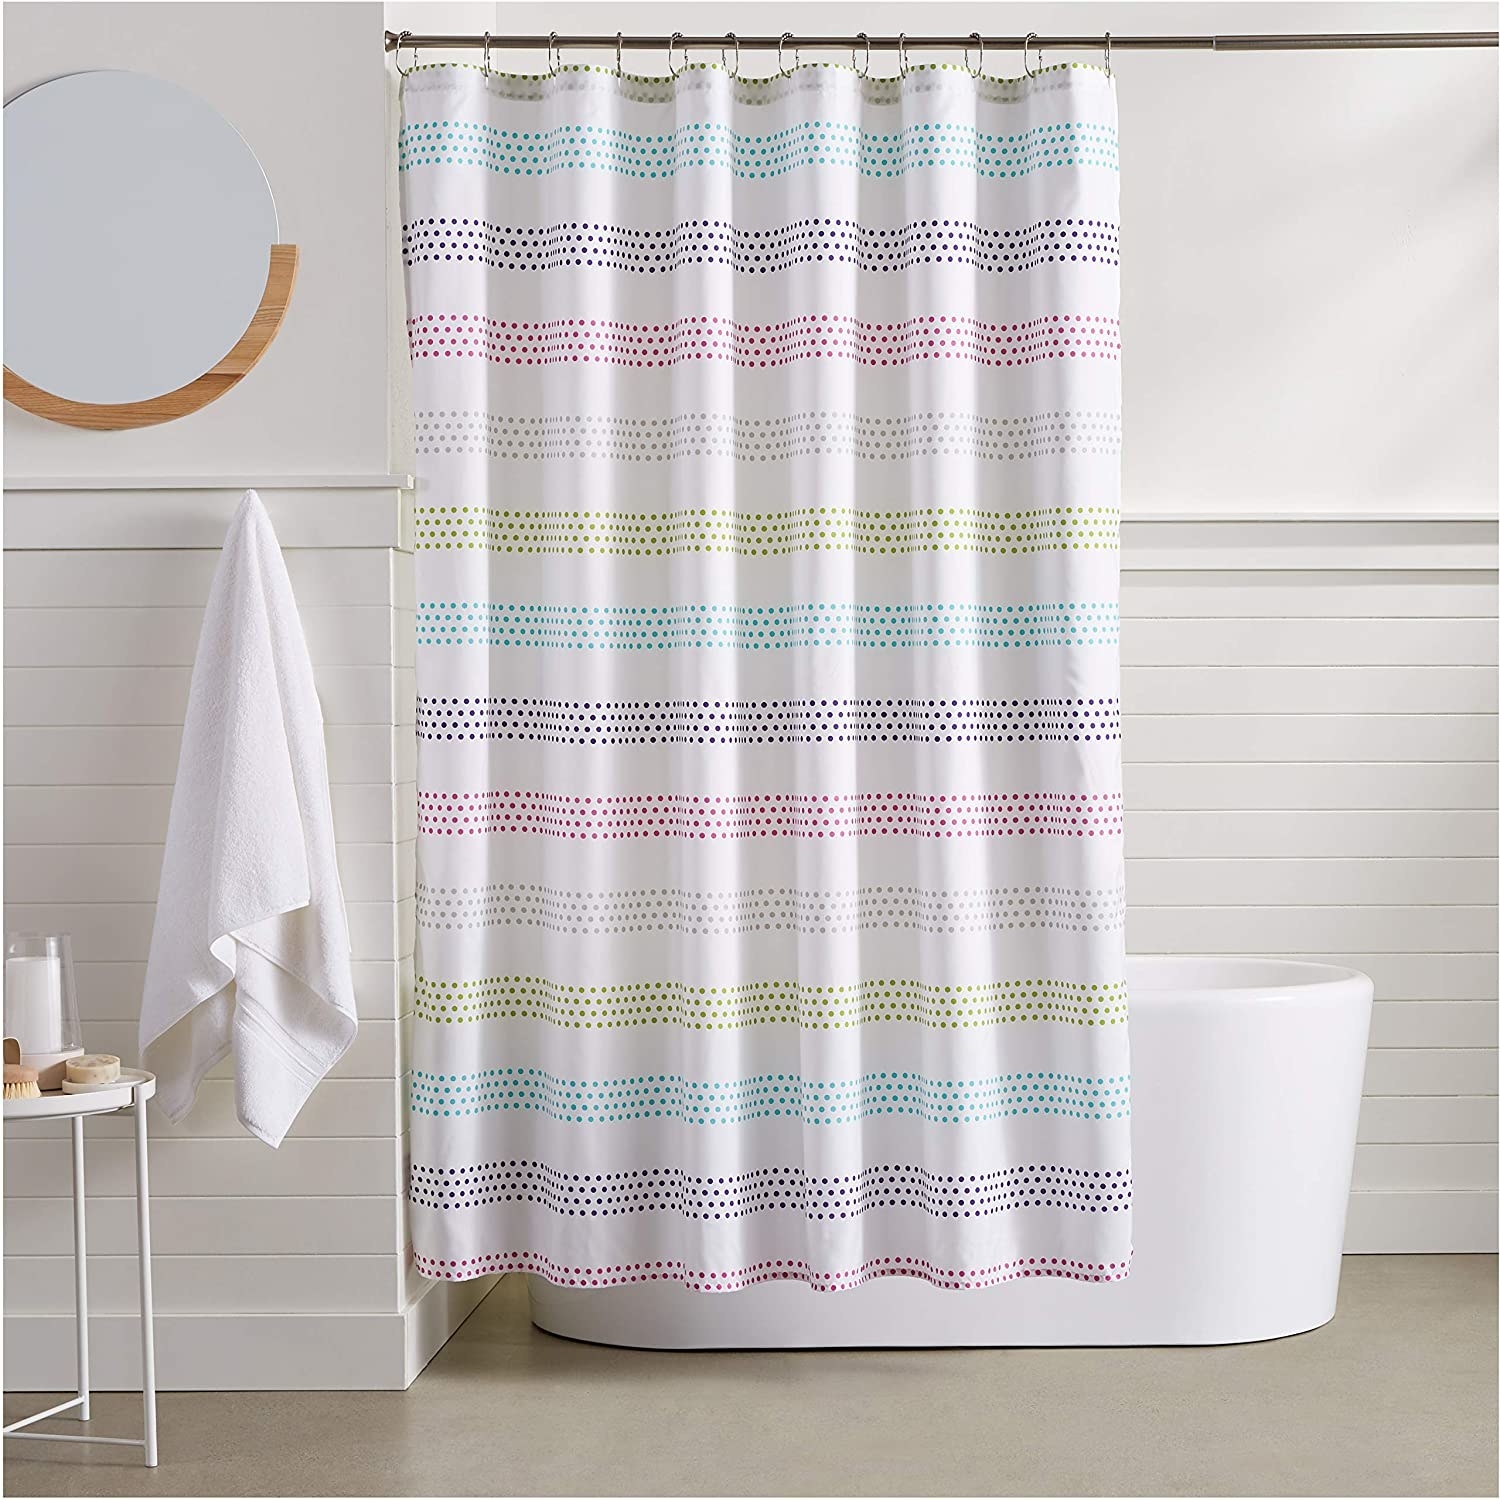 A pastel shower curtain on a curtain